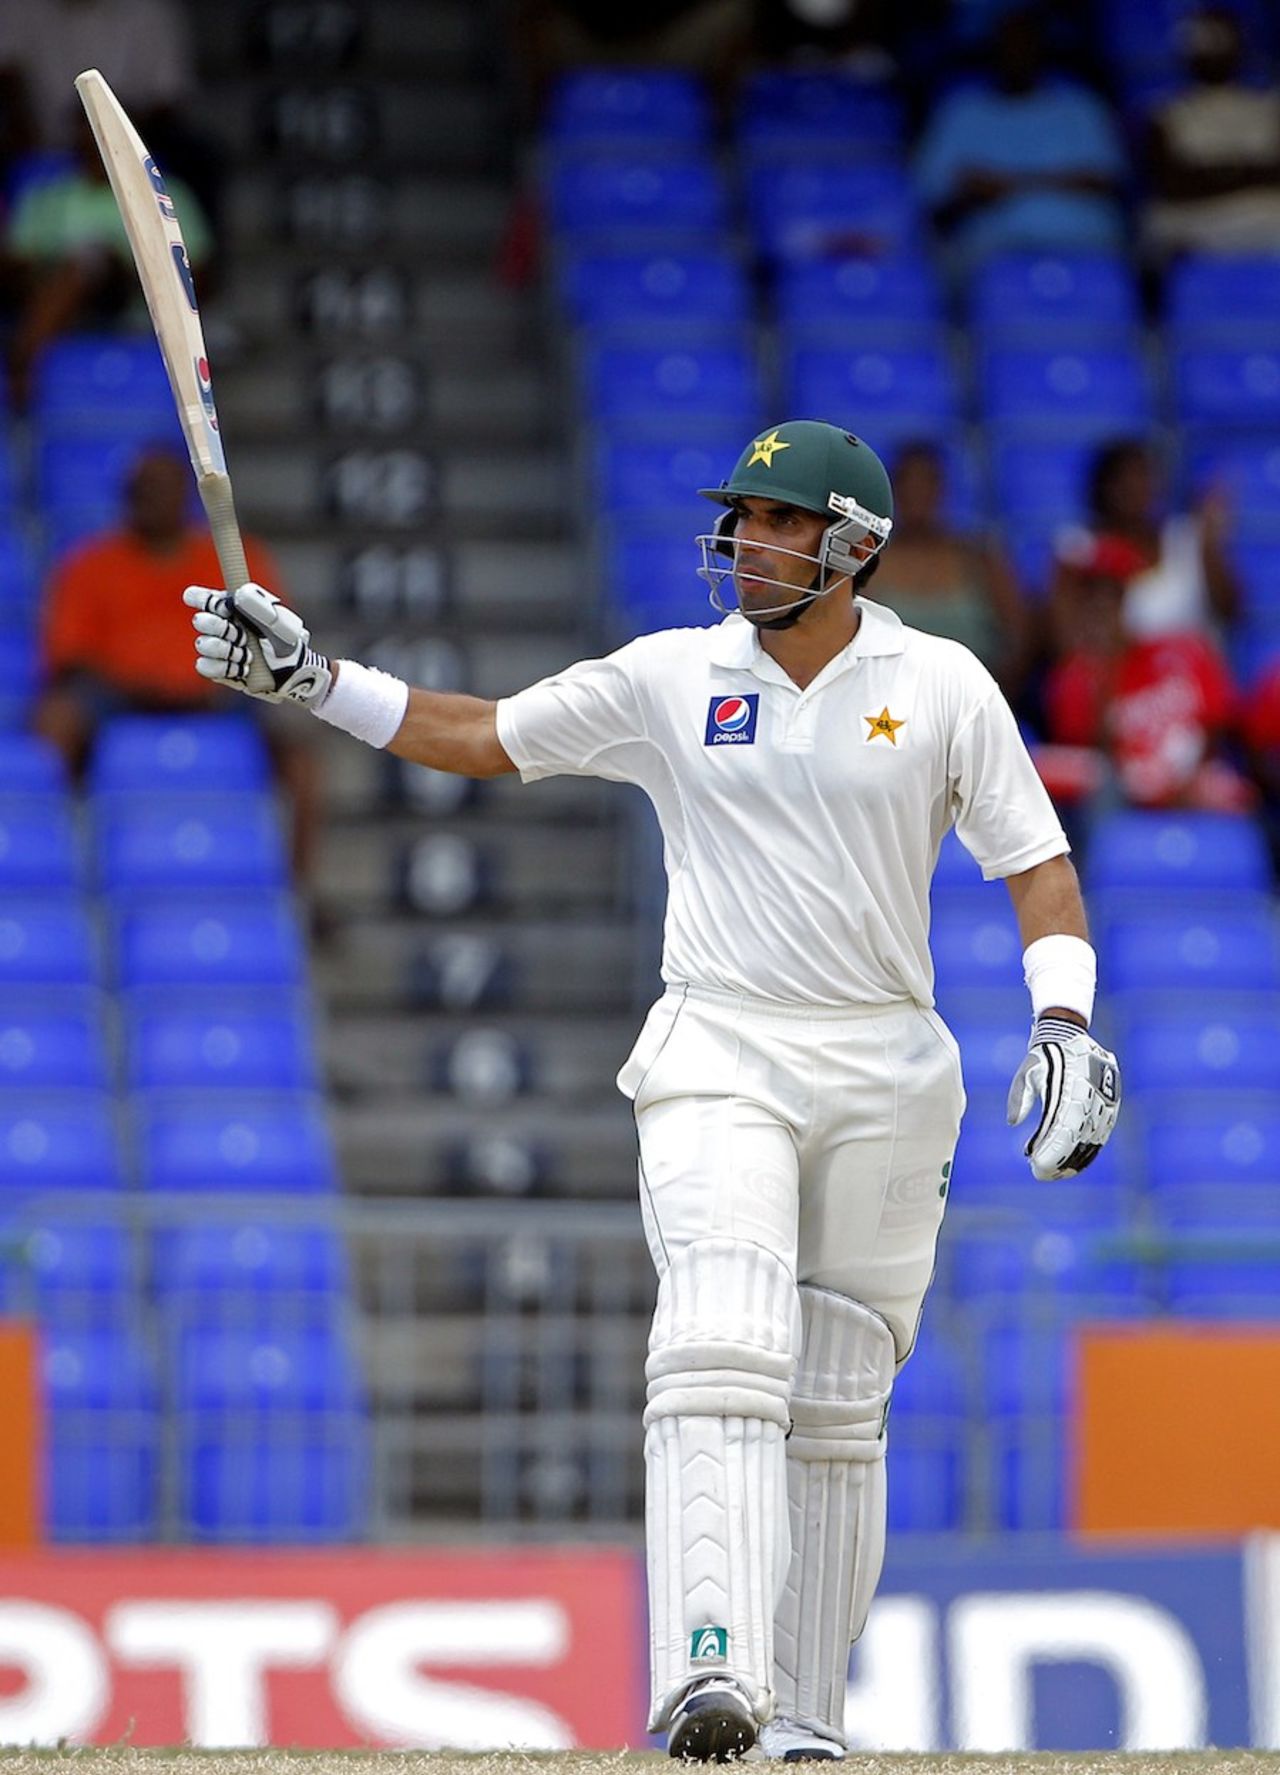 Misbah-ul-Haq celebrates after reaching 50, West Indies v Pakistan, 2nd Test, St Kitts, 4th day, May 23, 2011